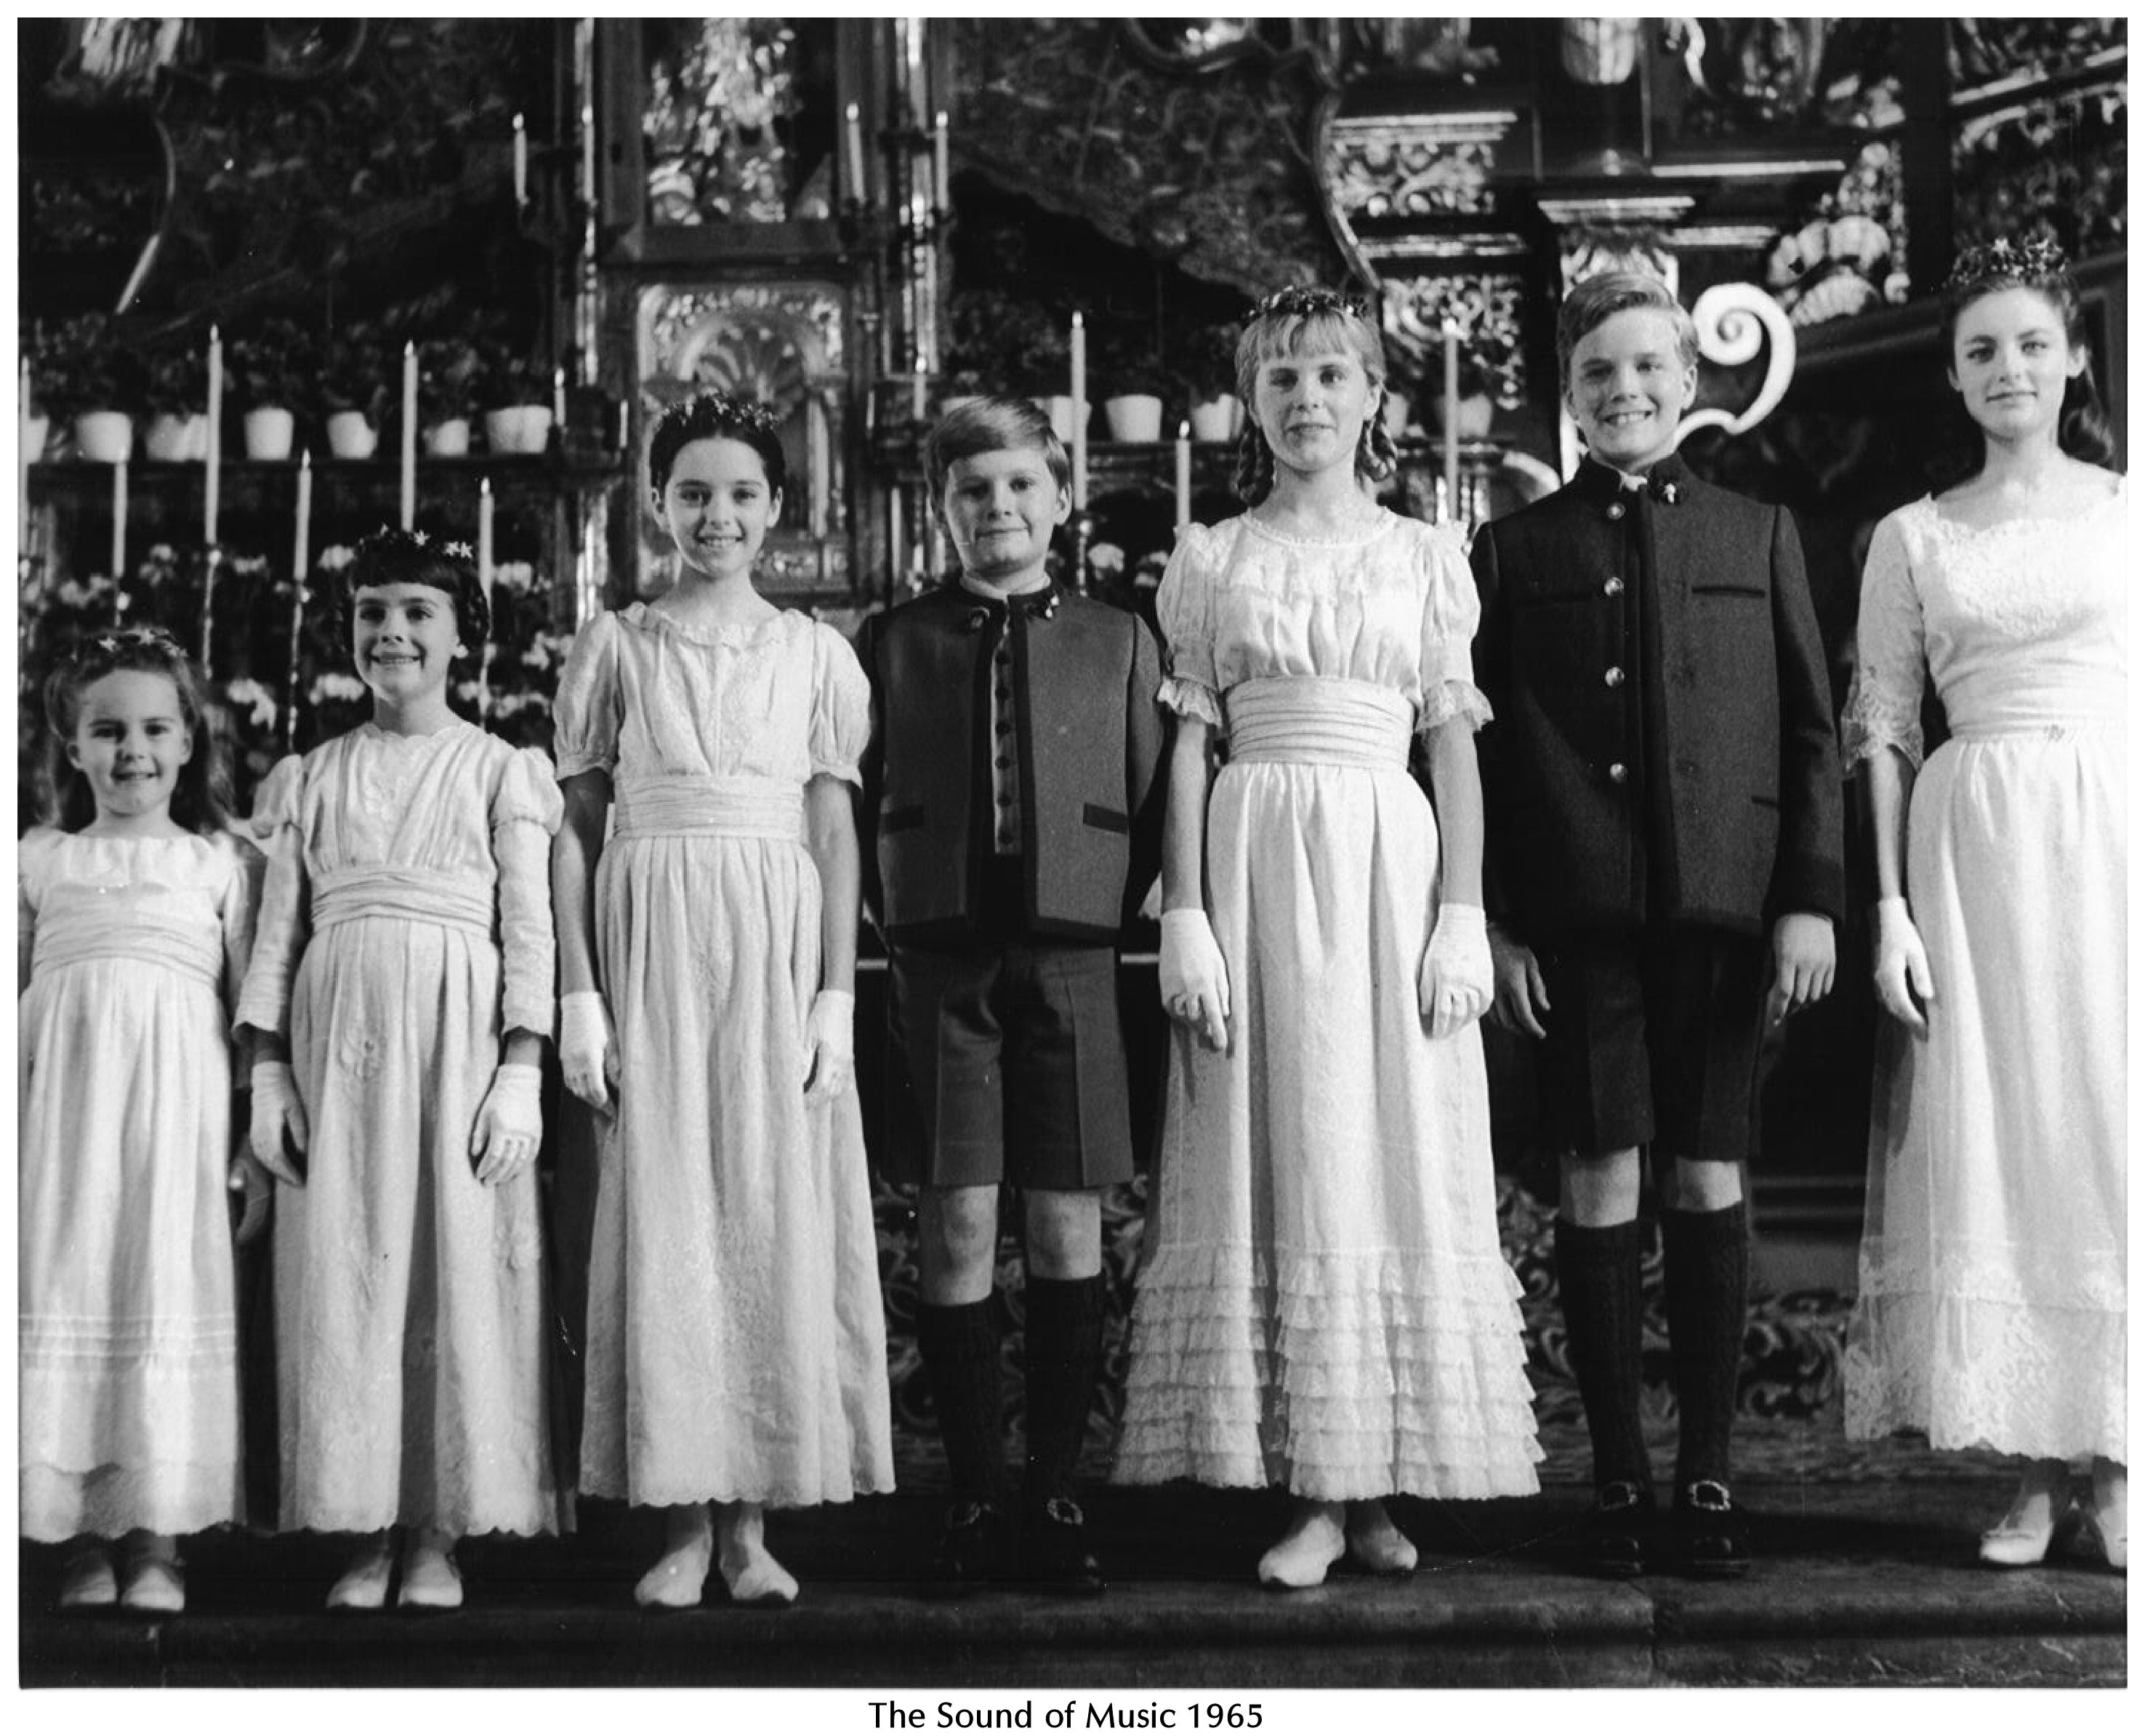 The Sound of Music 1965 (Debbie Turner, Marta, is 2nd from the left side)